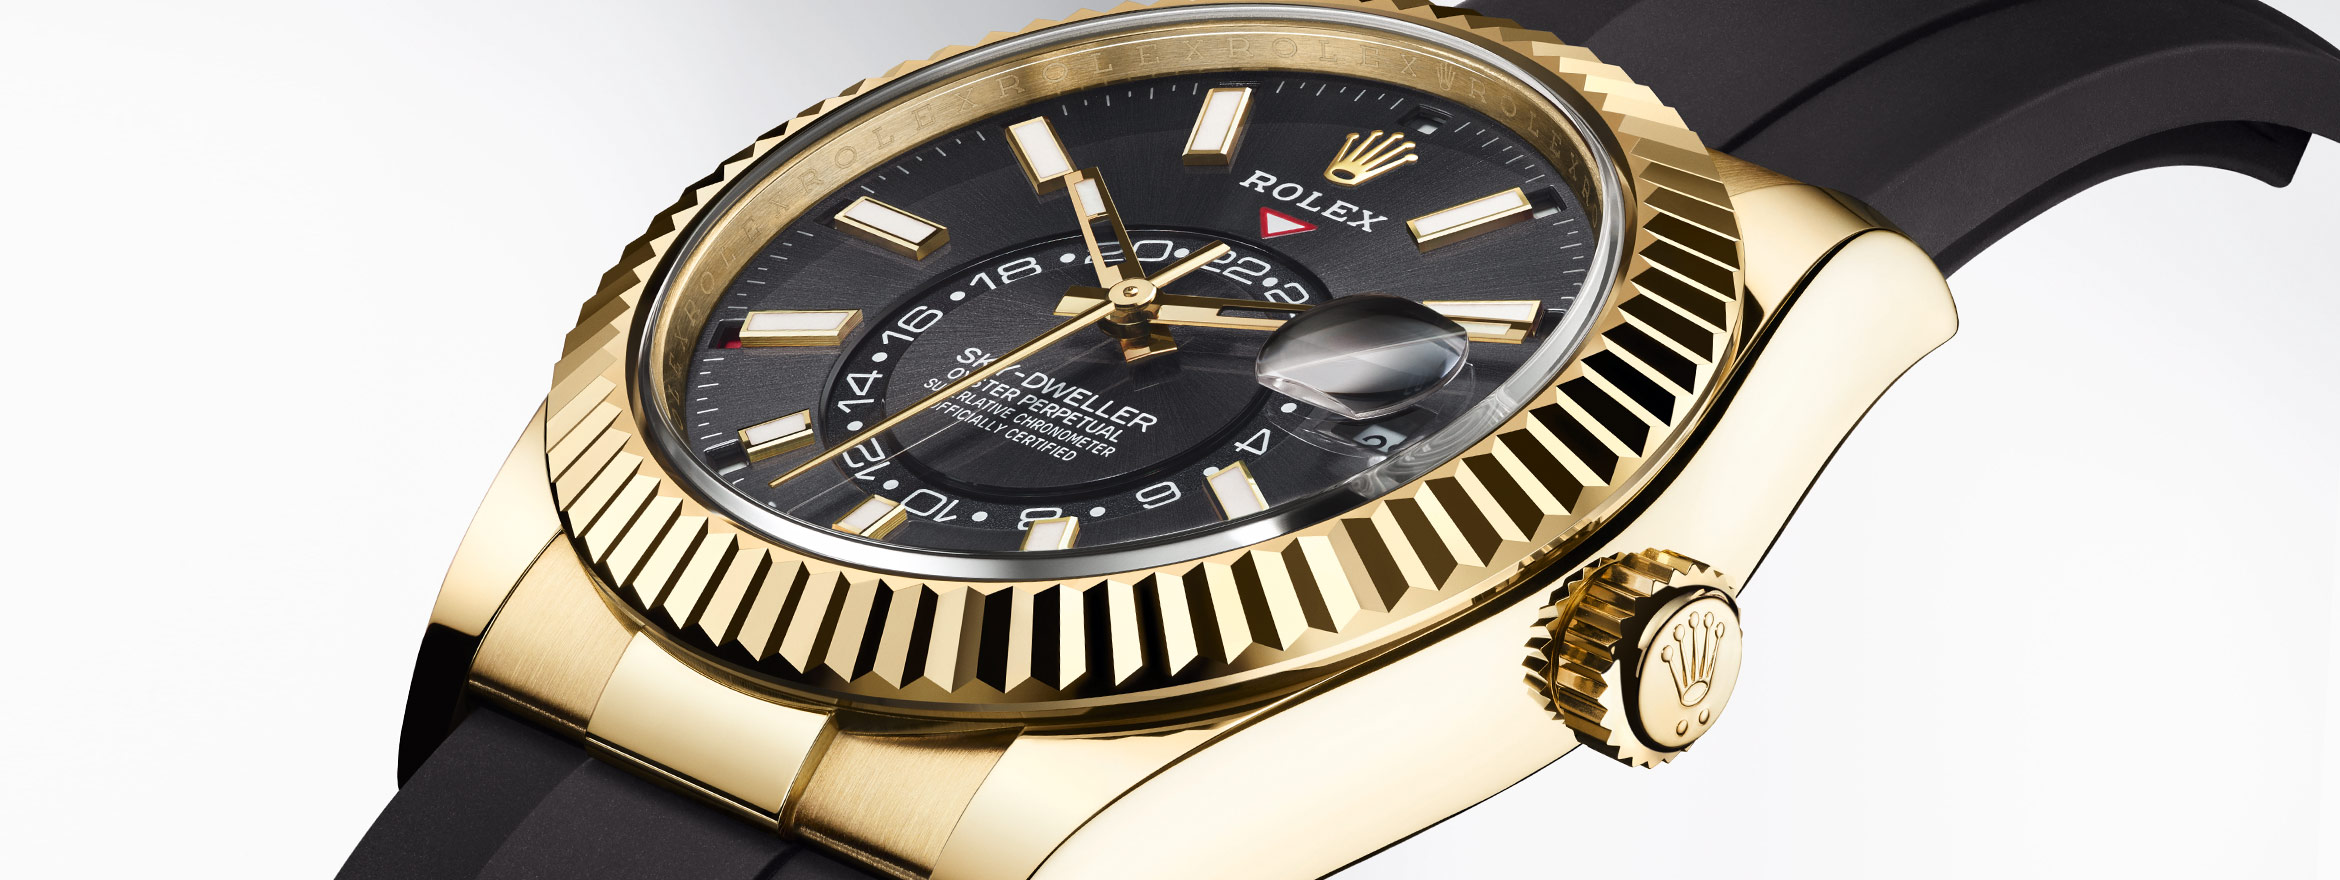 Rolex New Watches 2020: Oyster Perpetual Sky-Dweller